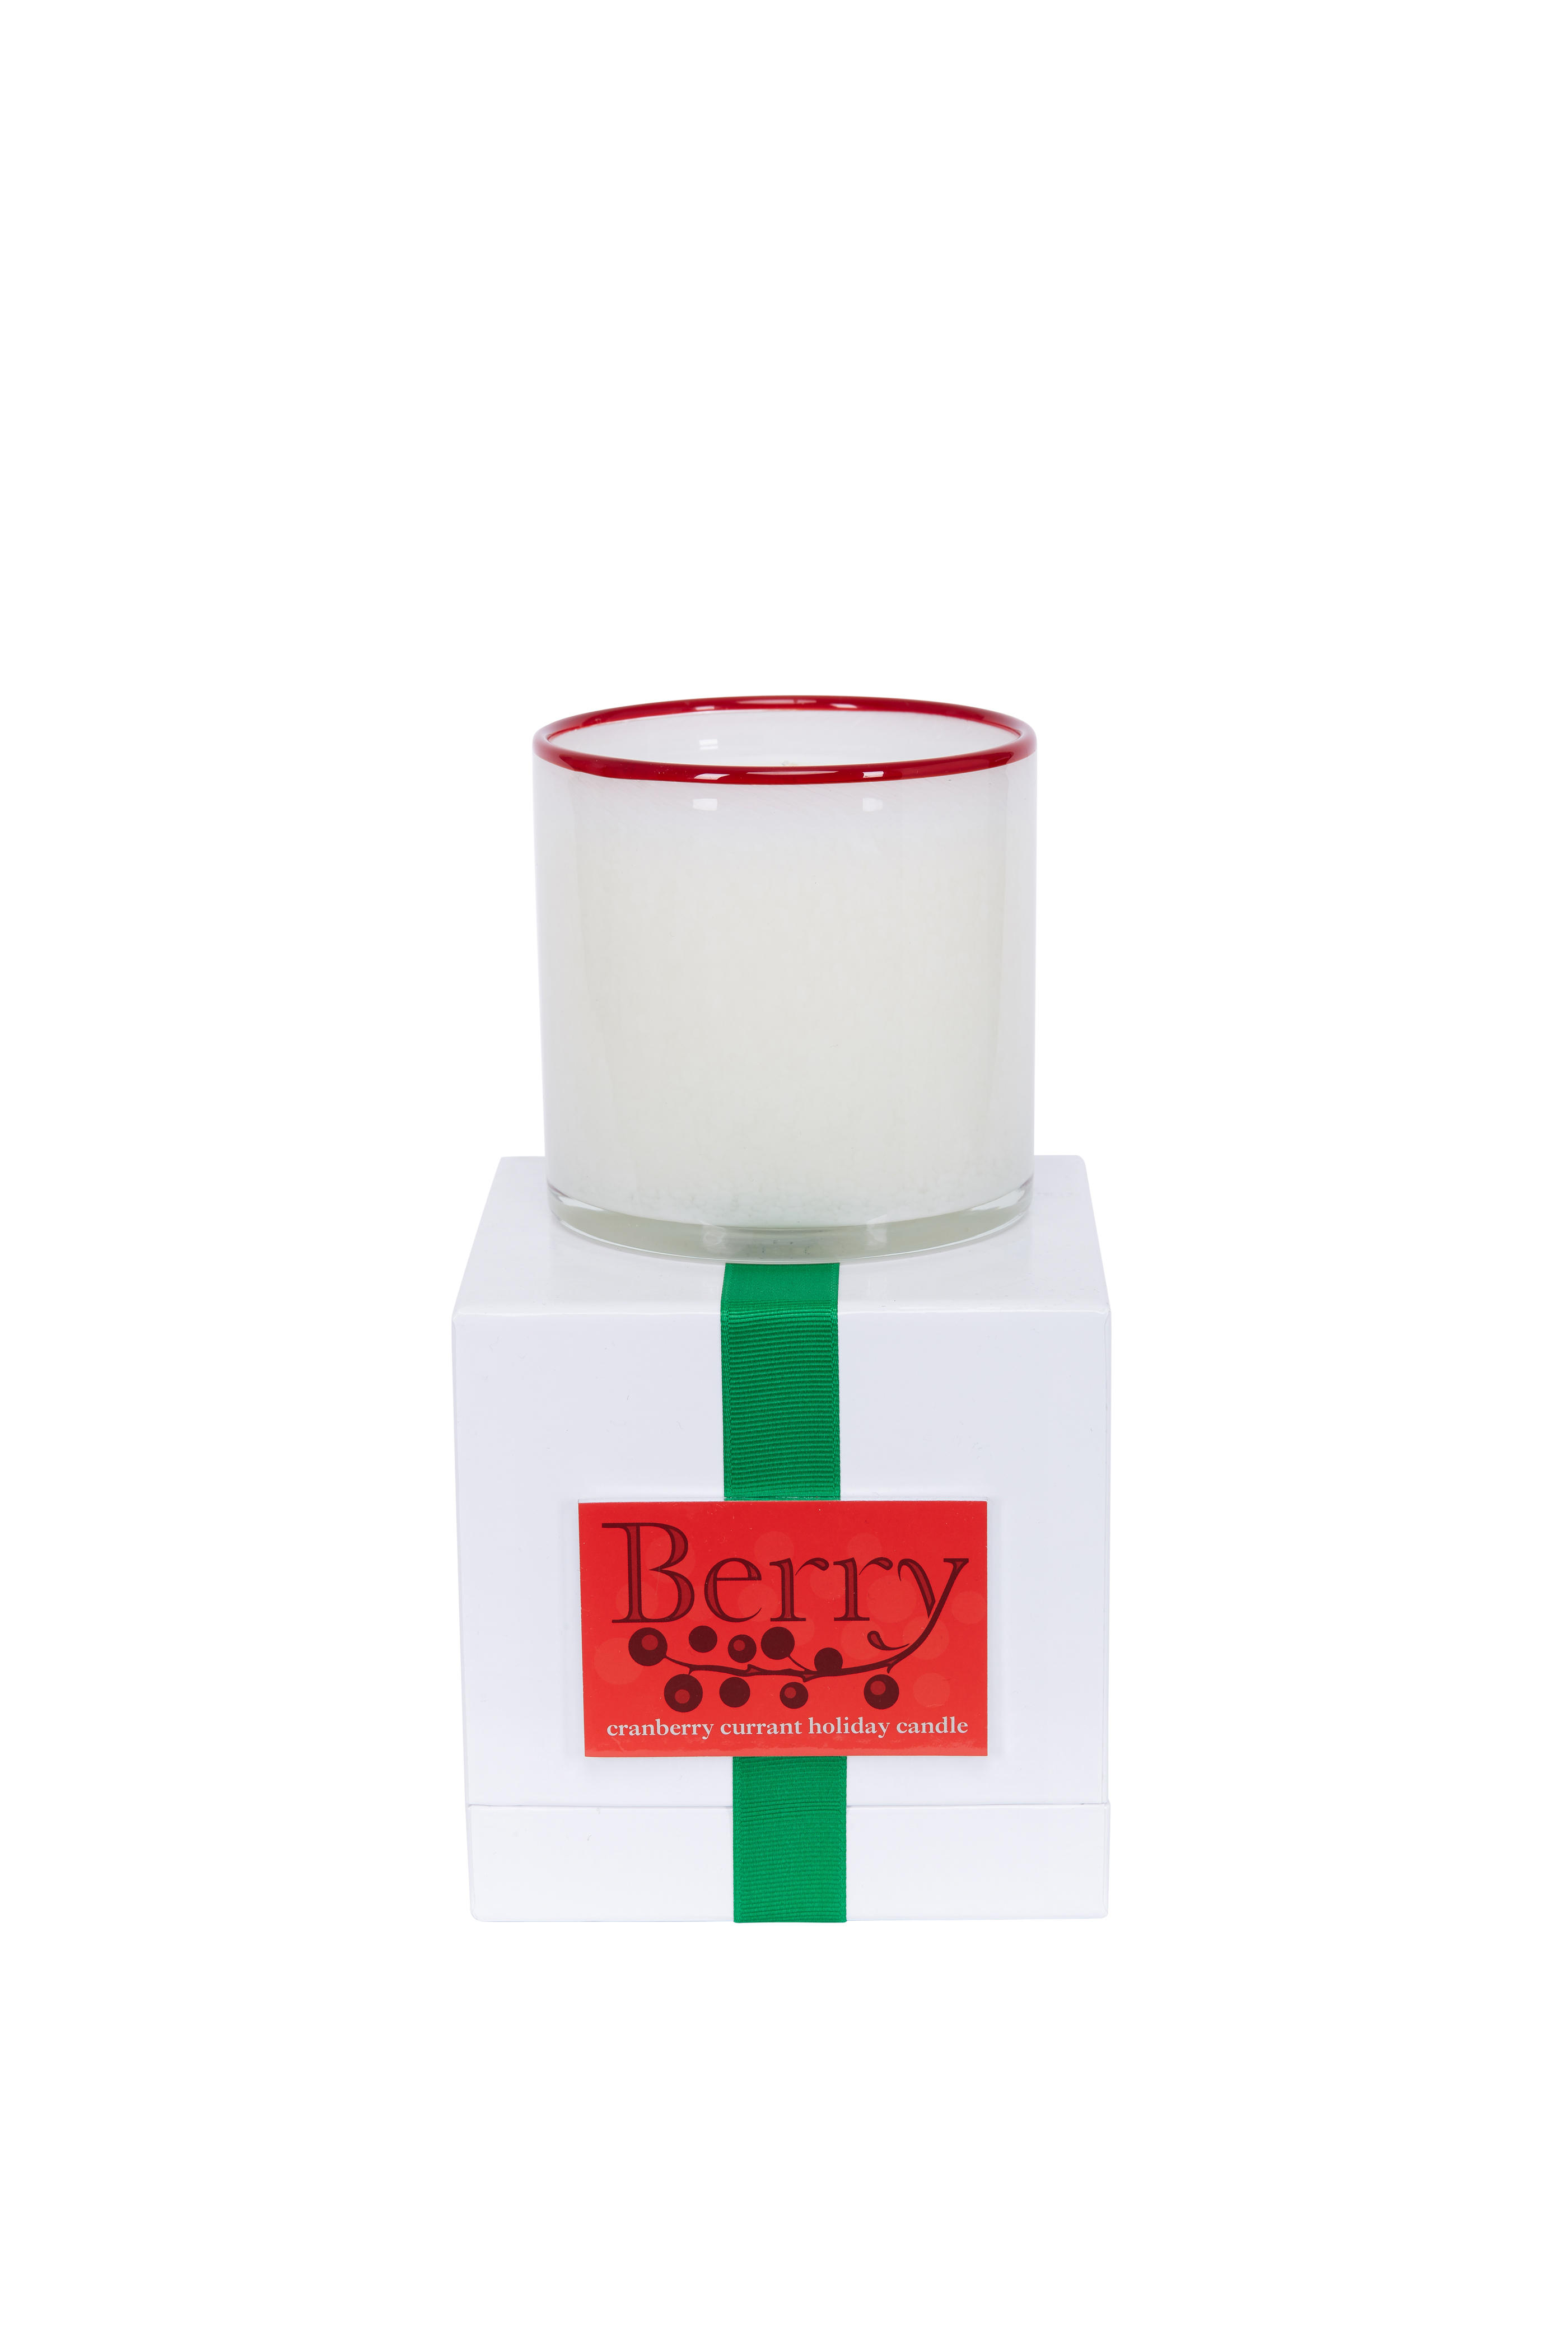 Cranberry Currant Holiday Candle 5oz NIB LAFCO New York 